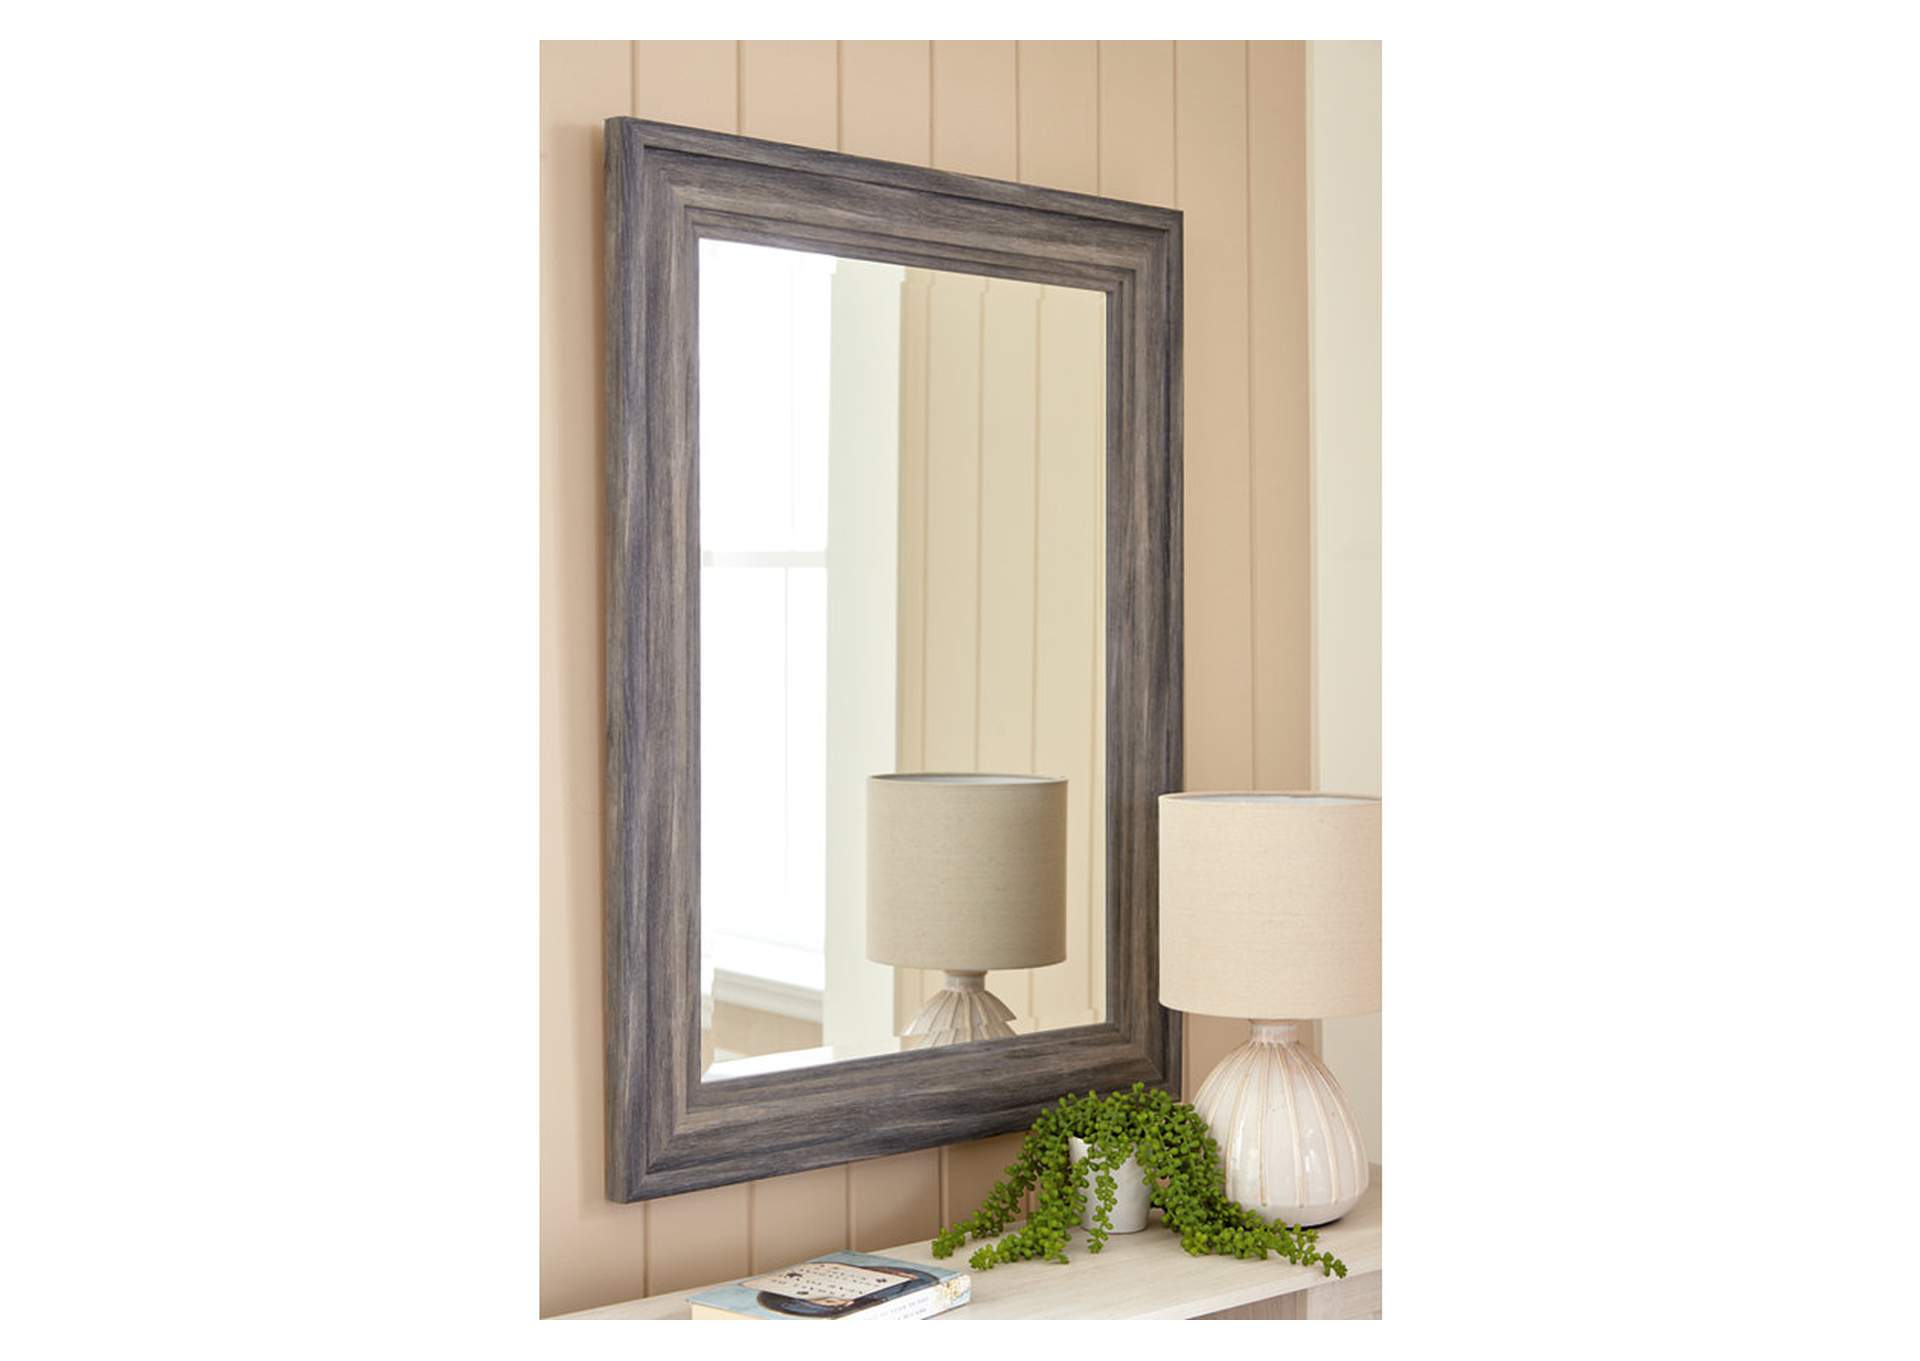 jACEE Accent Mirror,Direct To Consumer Express